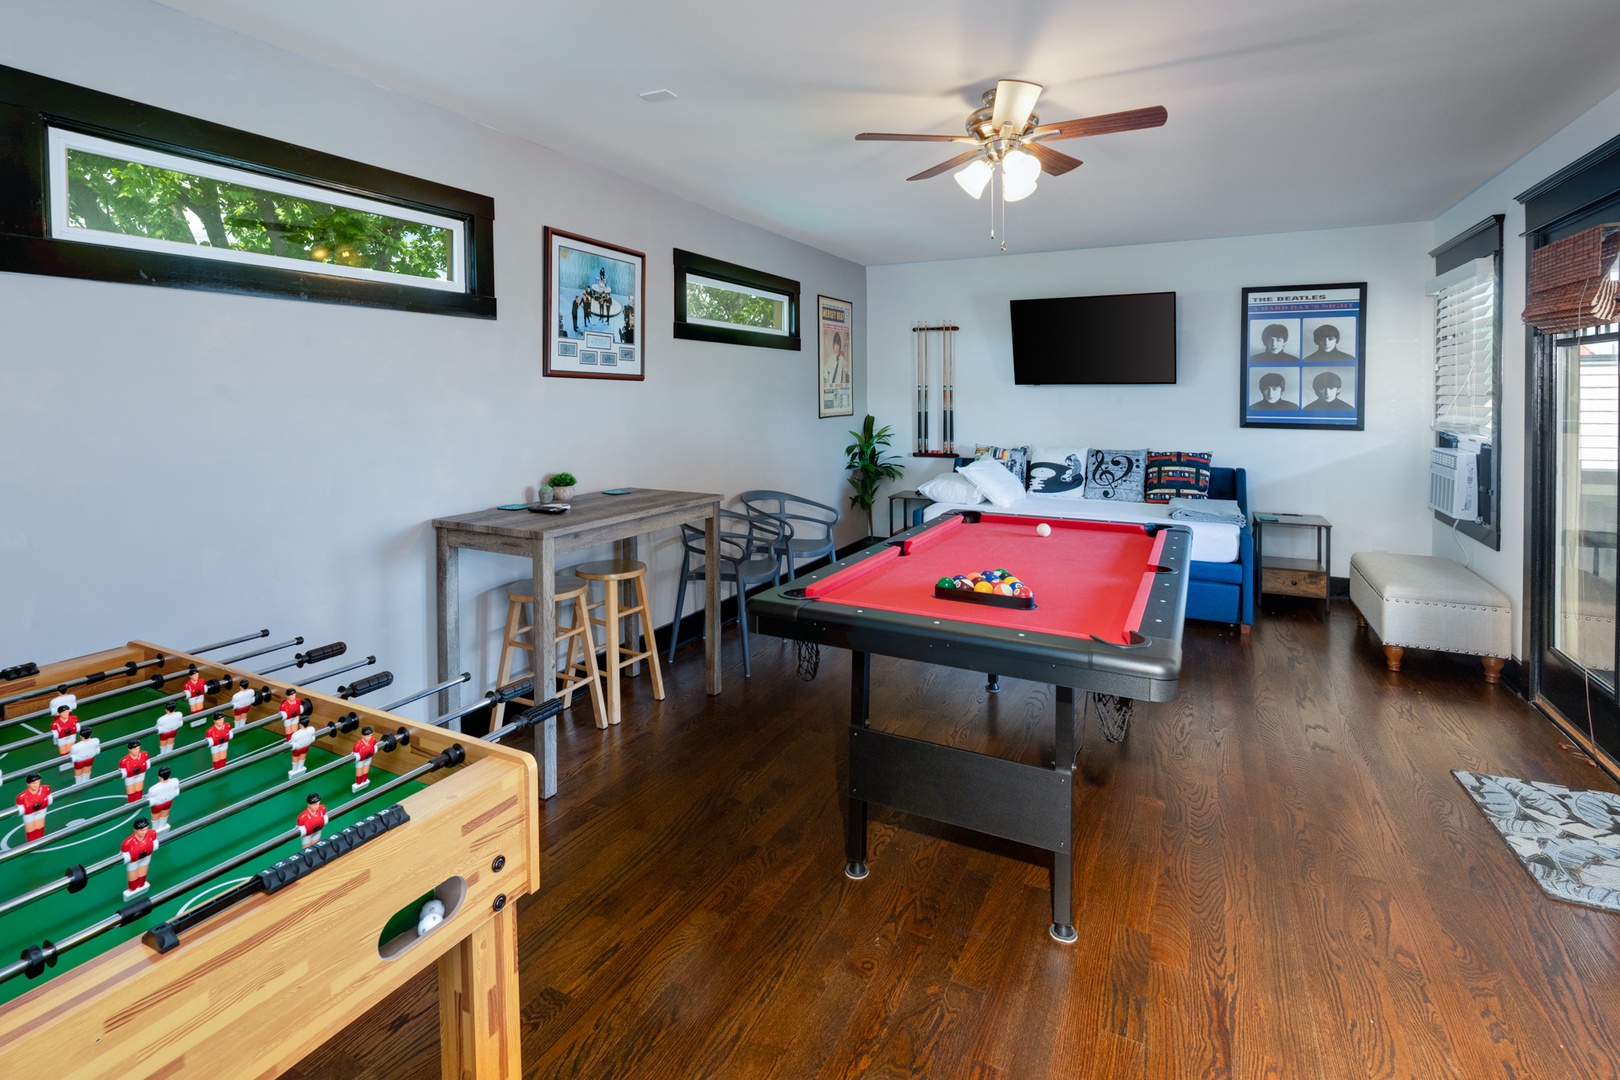 Third Floor Game Room offering Twin Bed & Trundle, Foosball, Pool Table, Smart TV, and Mini Bar Area